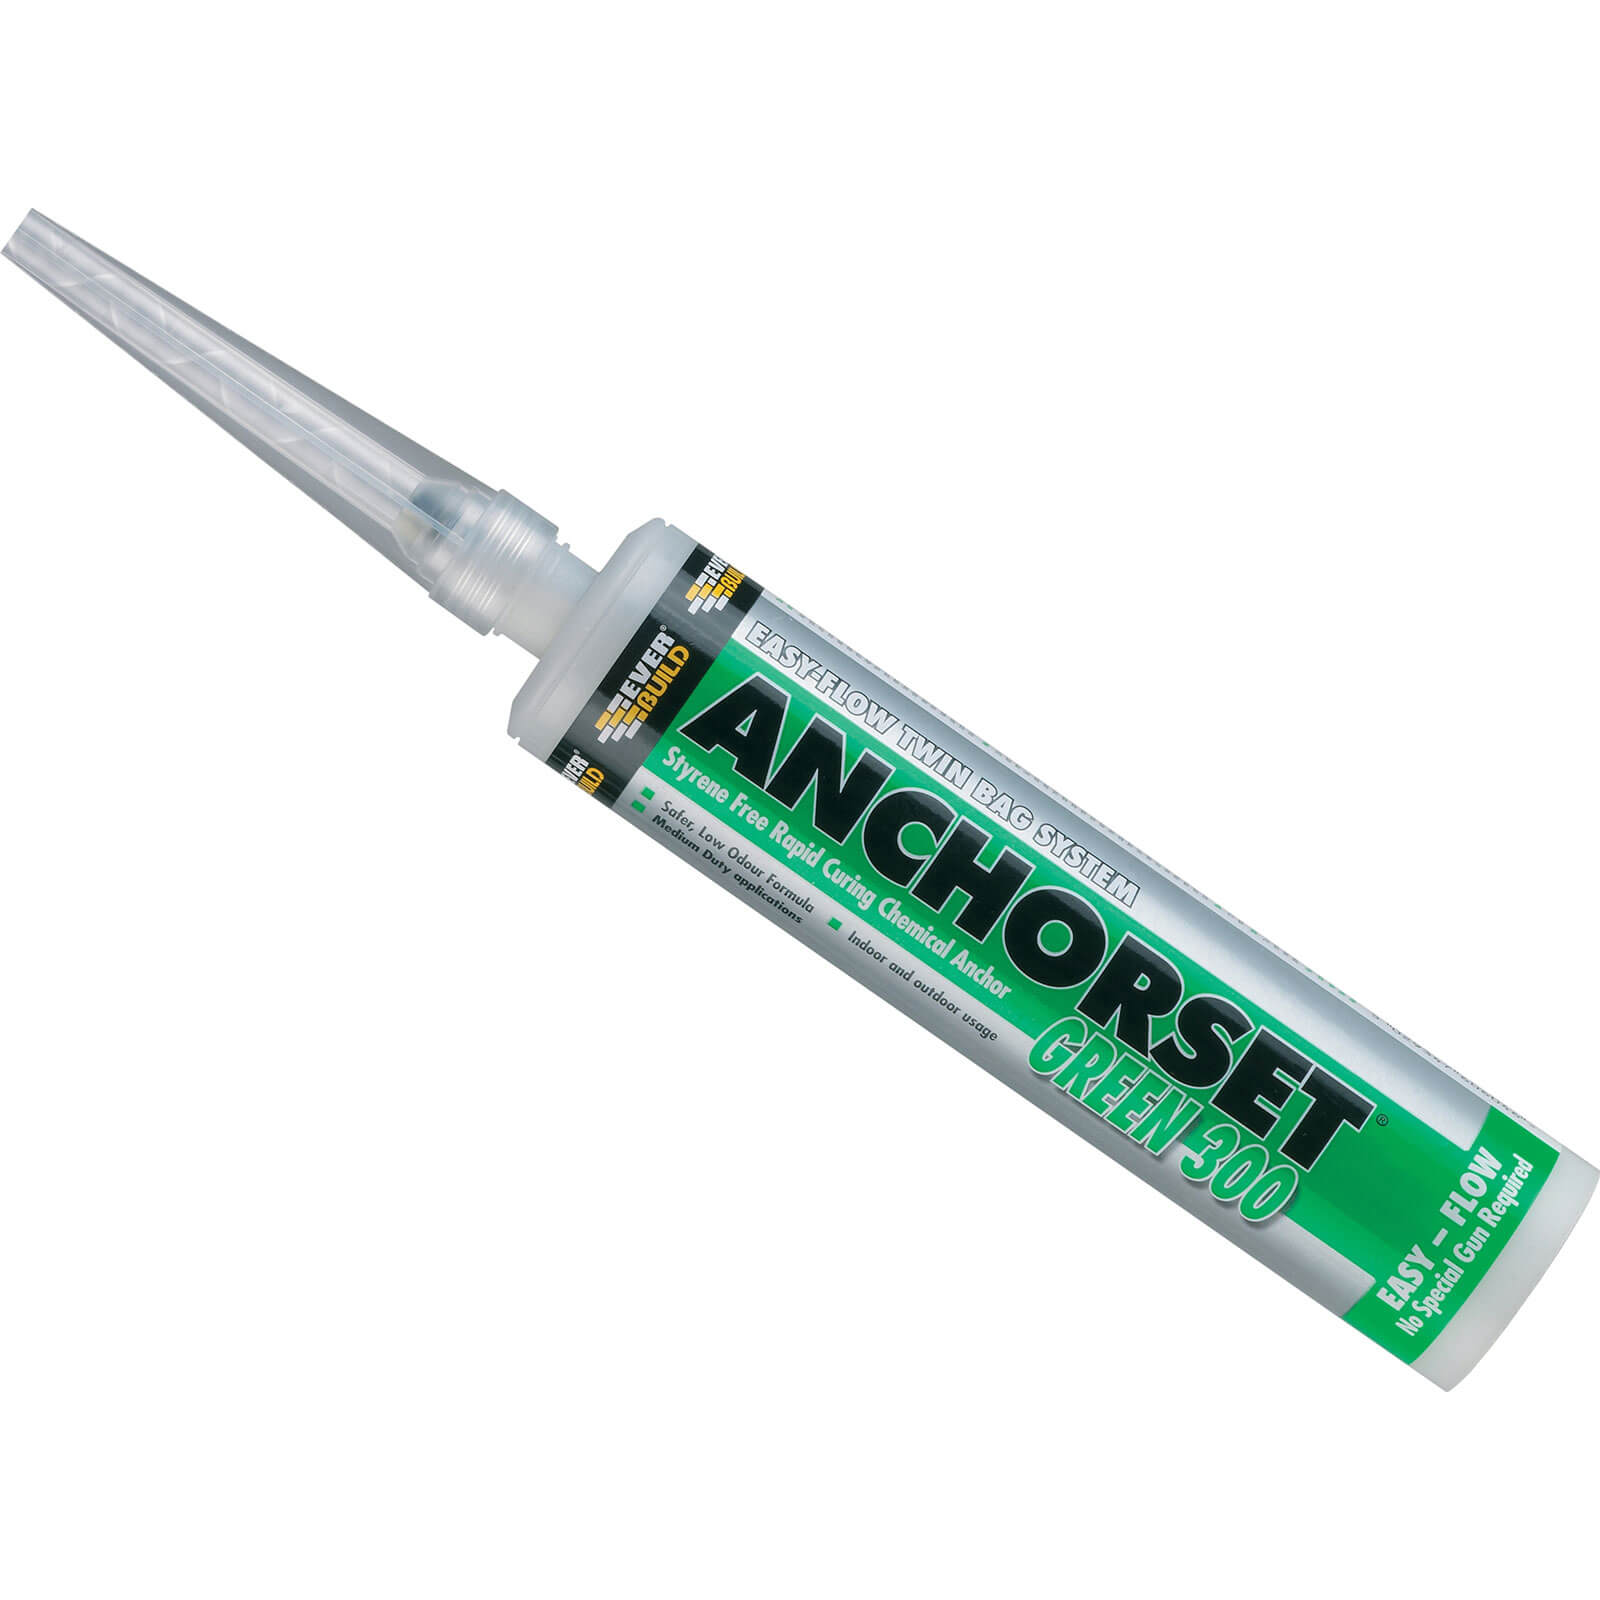 Image of Everbuild Anchorset Chemical Anchor Green 300ml